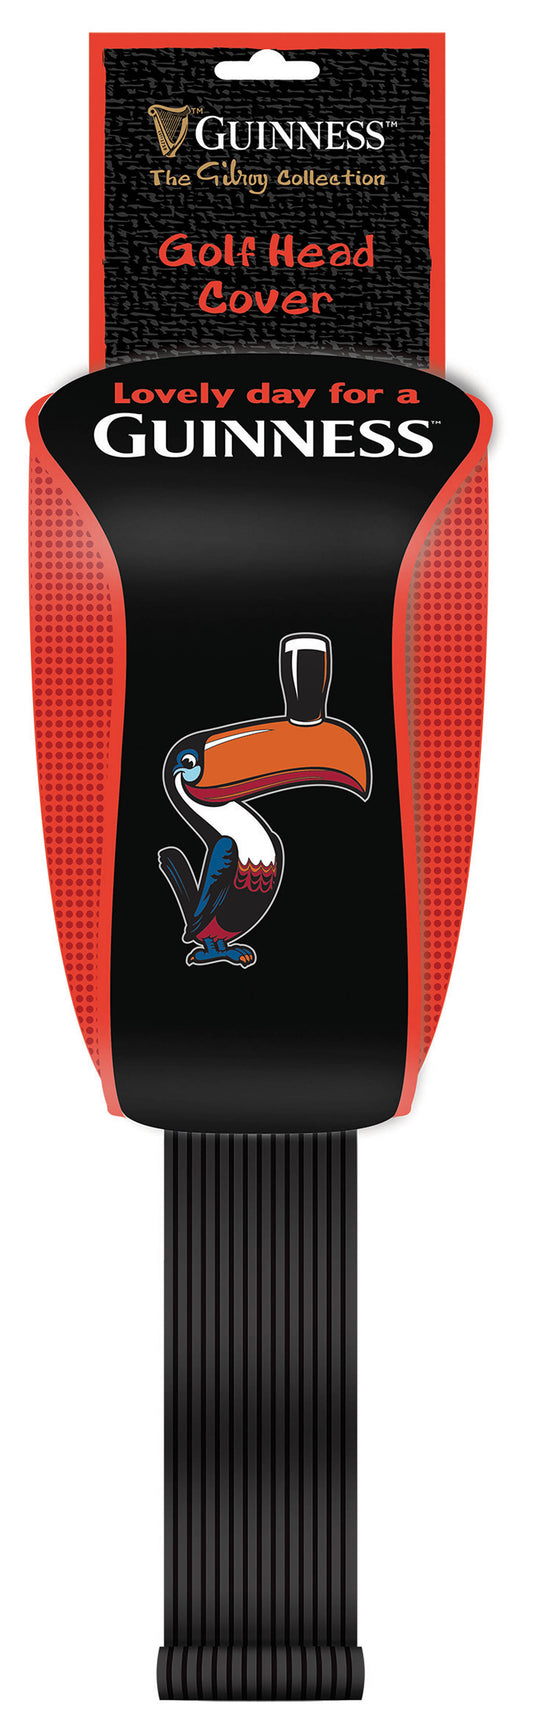 A black and red Guinness Gilroy Golf Head Cover with a toucan graphic and the text "Lovely day for a Guinness." The packaging above reads "Guinness Webstore US The Golf Collection Golf Head Cover.